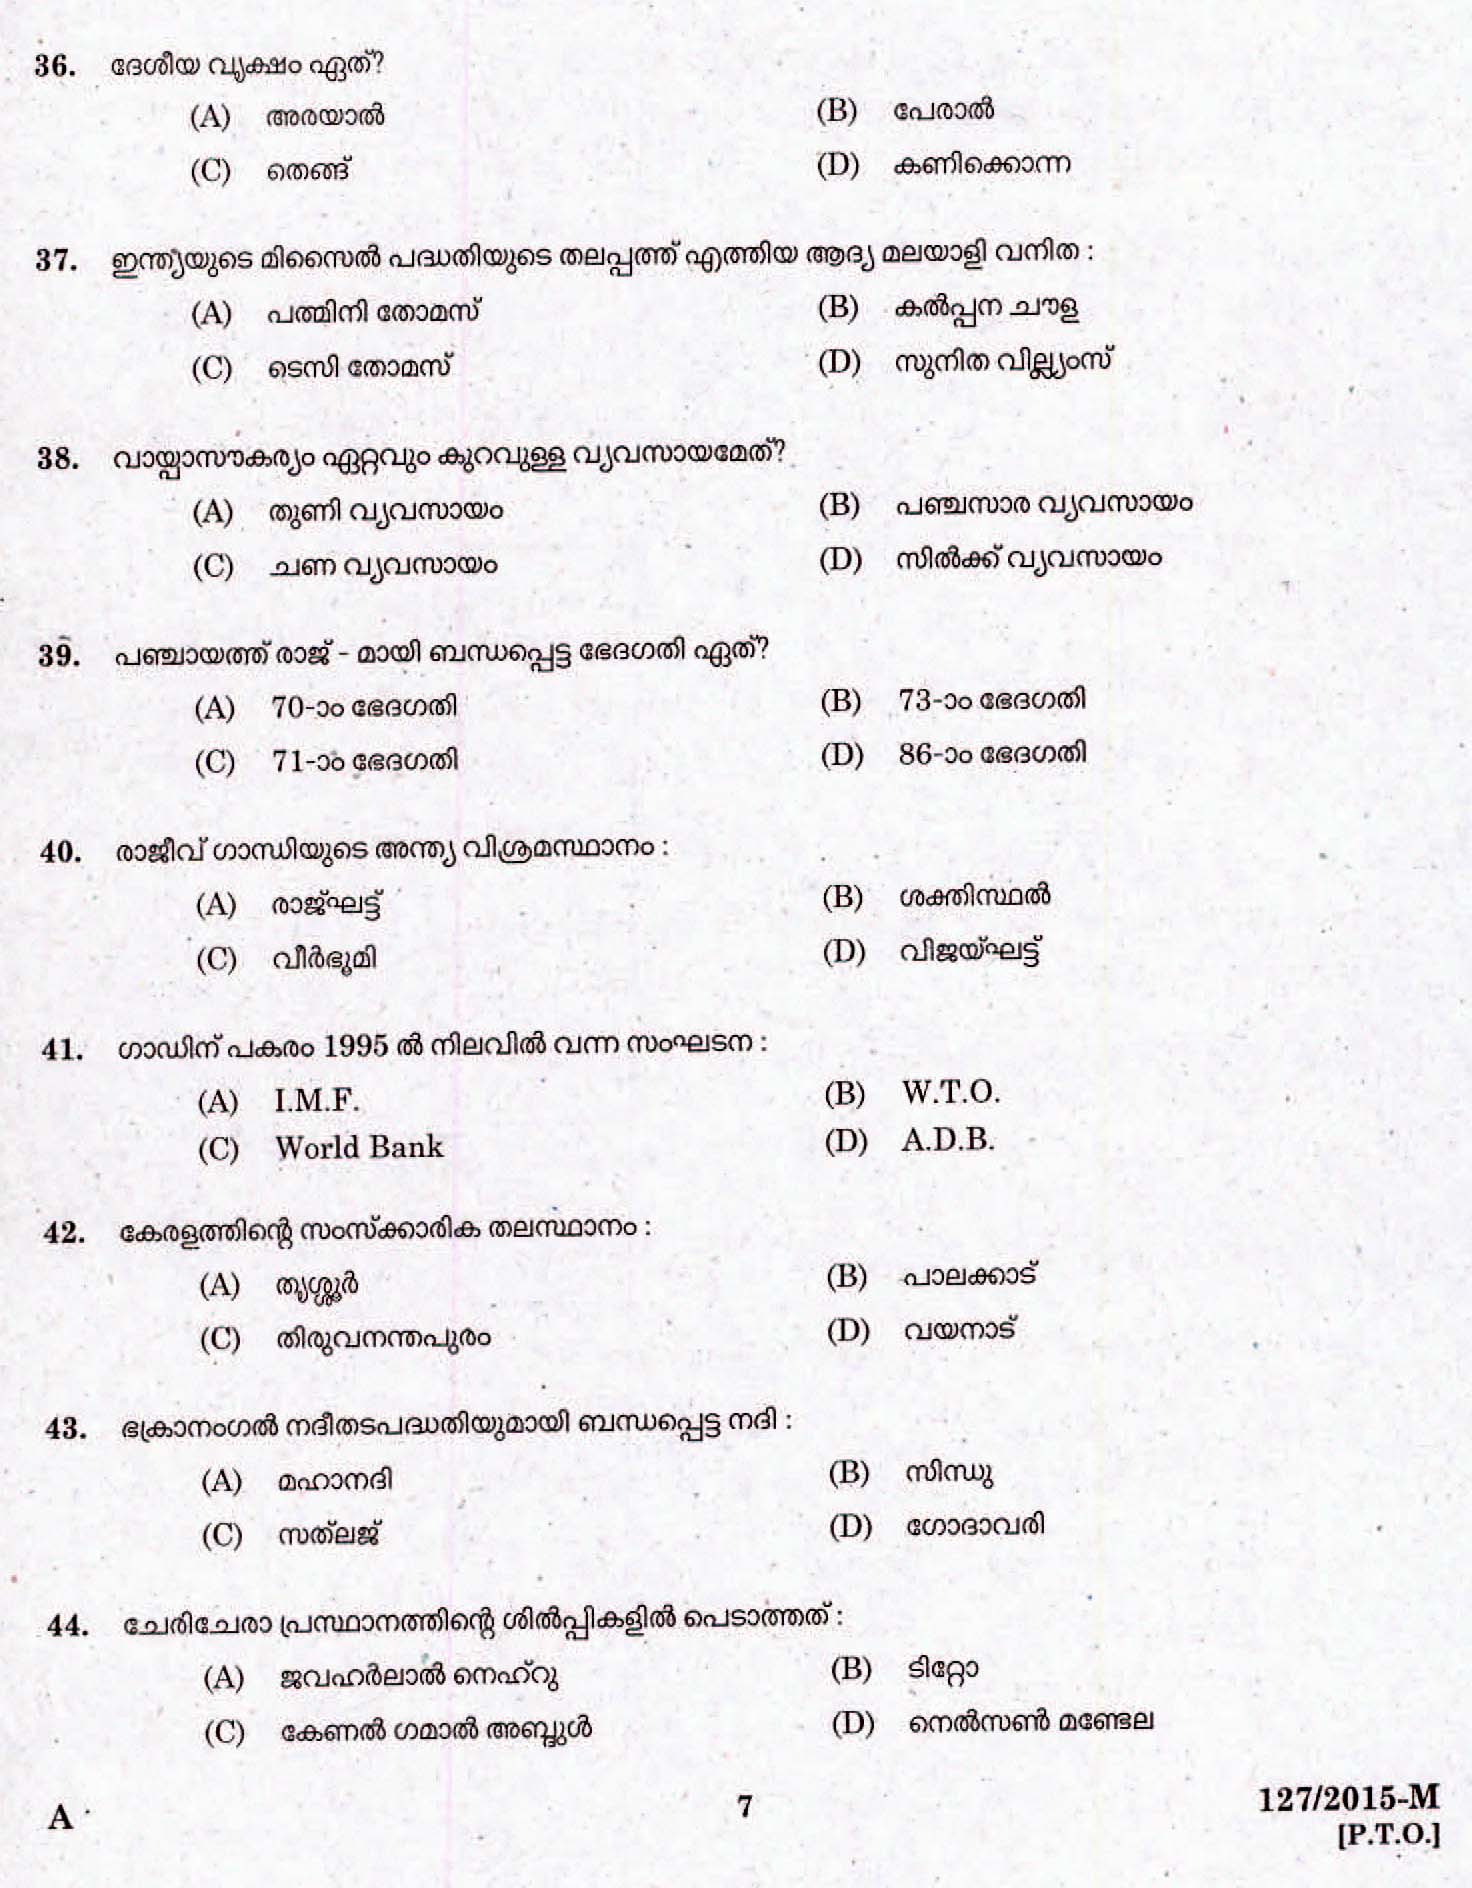 LD Clerk Bill Collector Various Question Paper Malayalam 2015 Paper Code 1272015 M 5